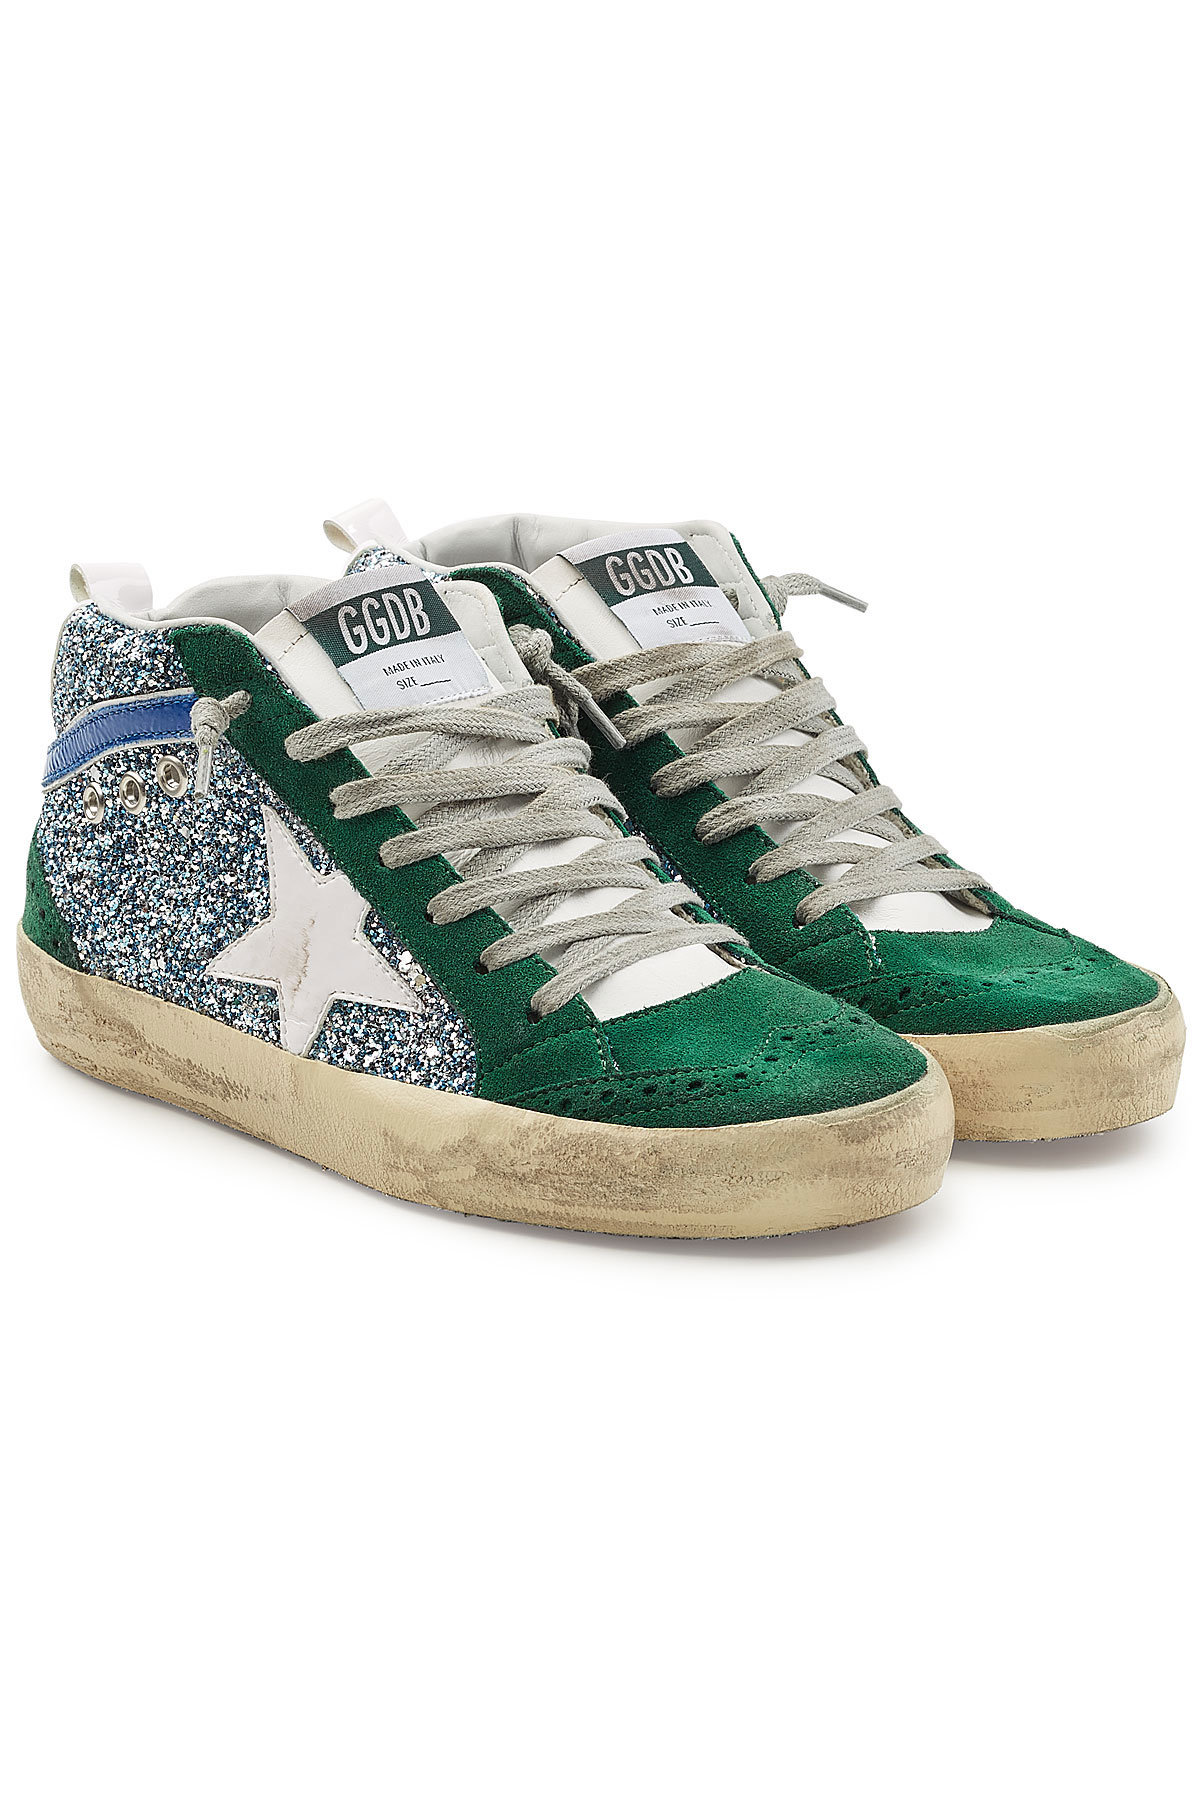 Golden Goose Deluxe Brand - Mid Star Leather, Suede and Glitter Sneakers